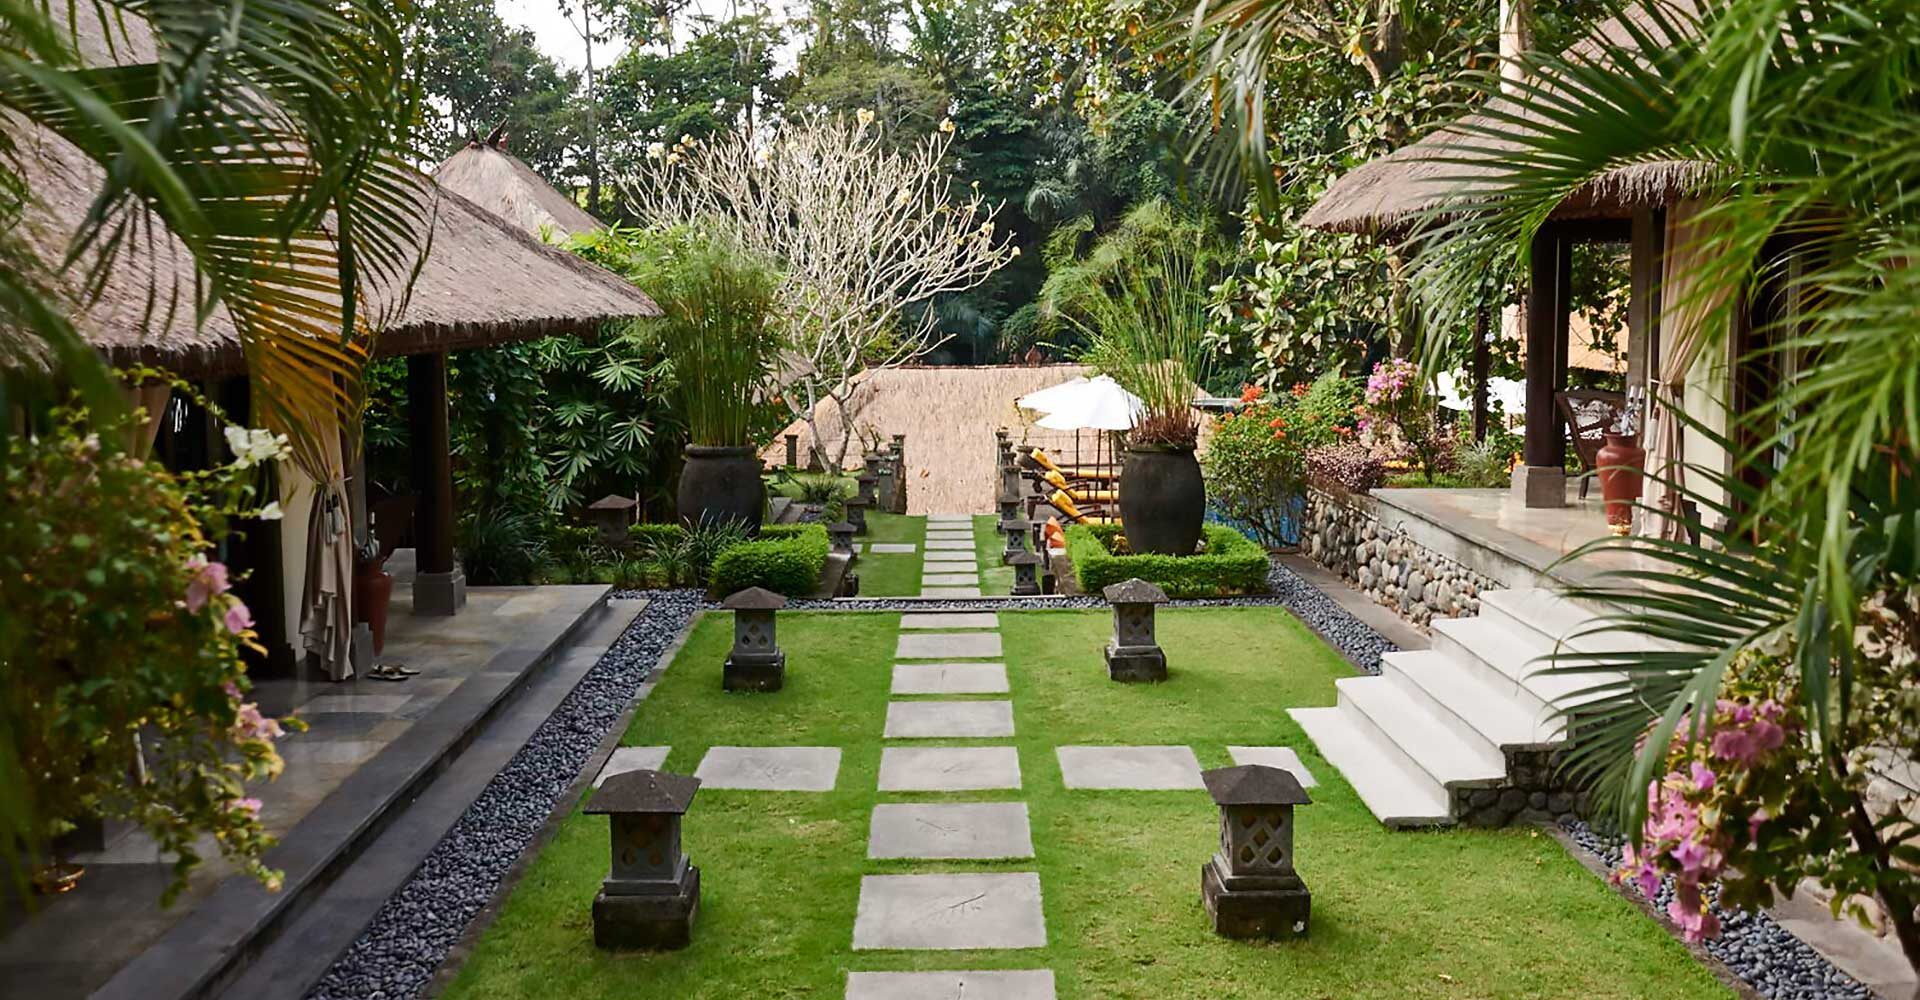 Stone pathway with manicured gardens between two buildings at Sukhavati Bali.